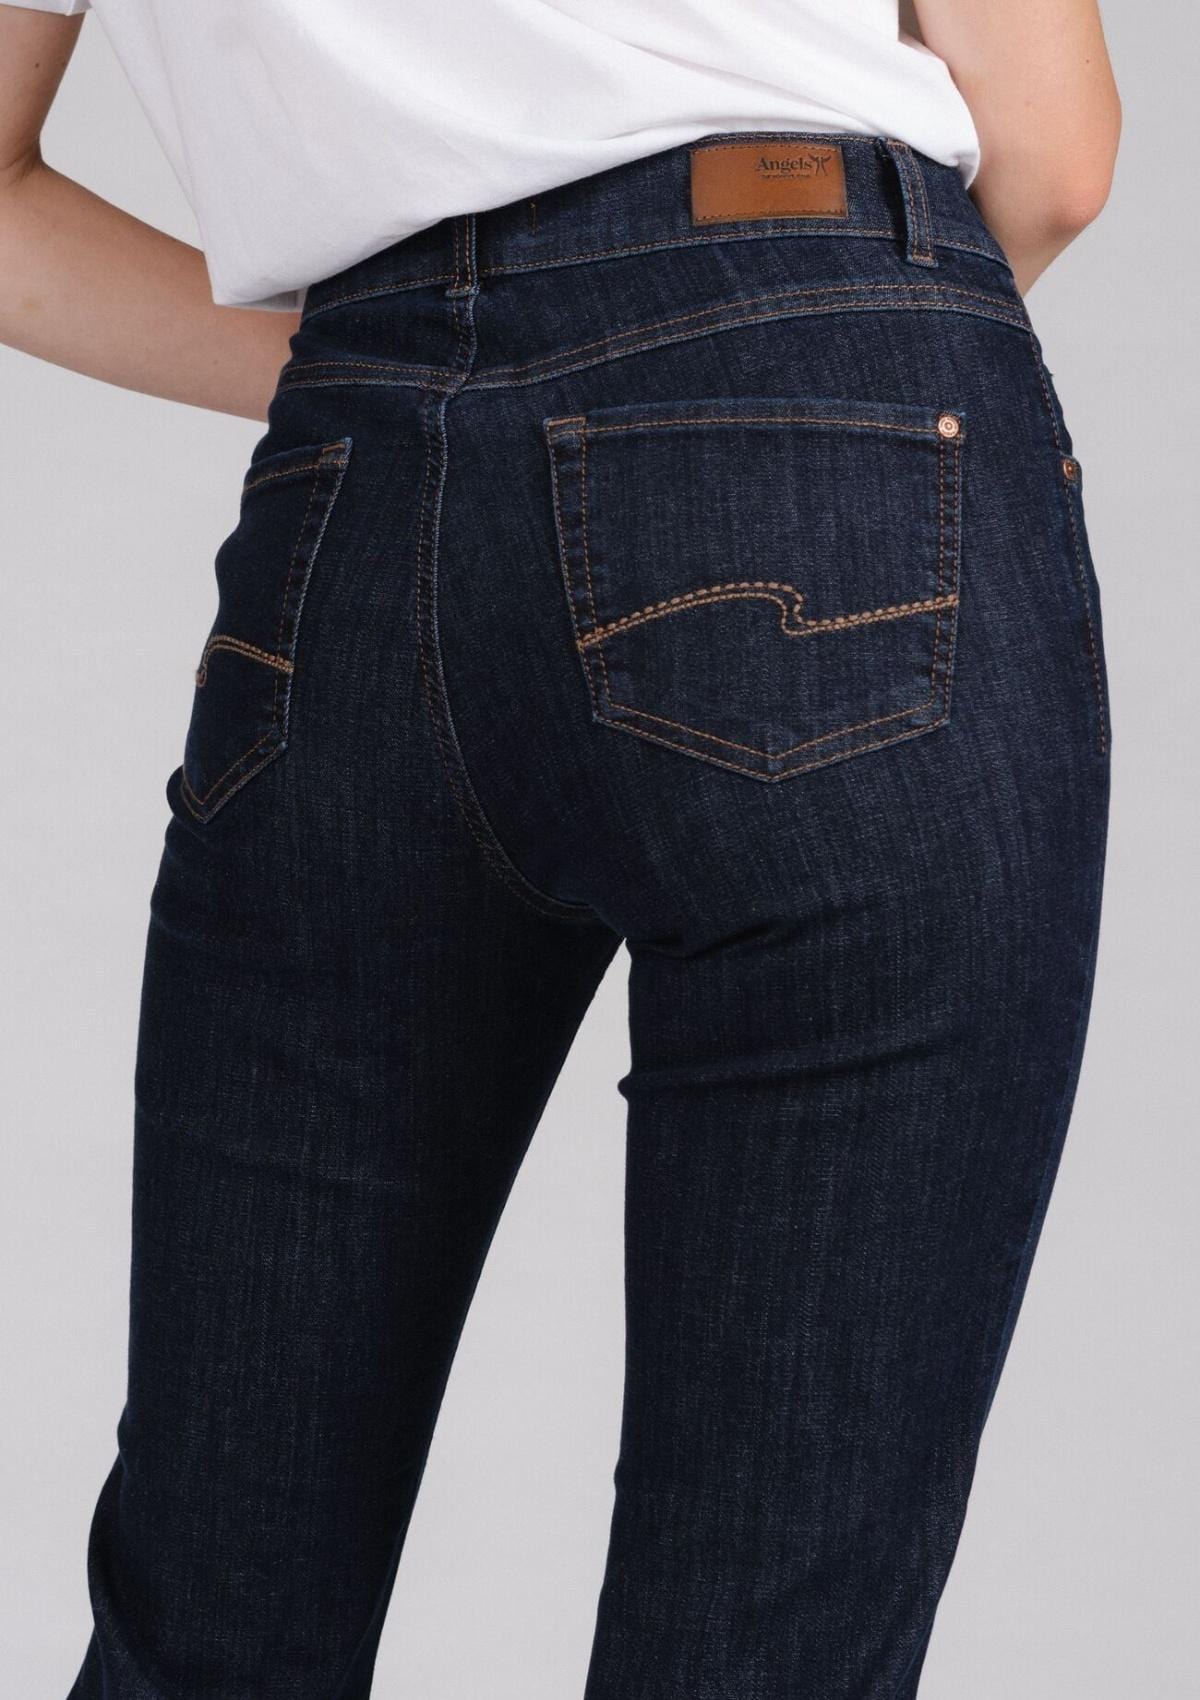 Angels Jeans 3334 31 | Cici